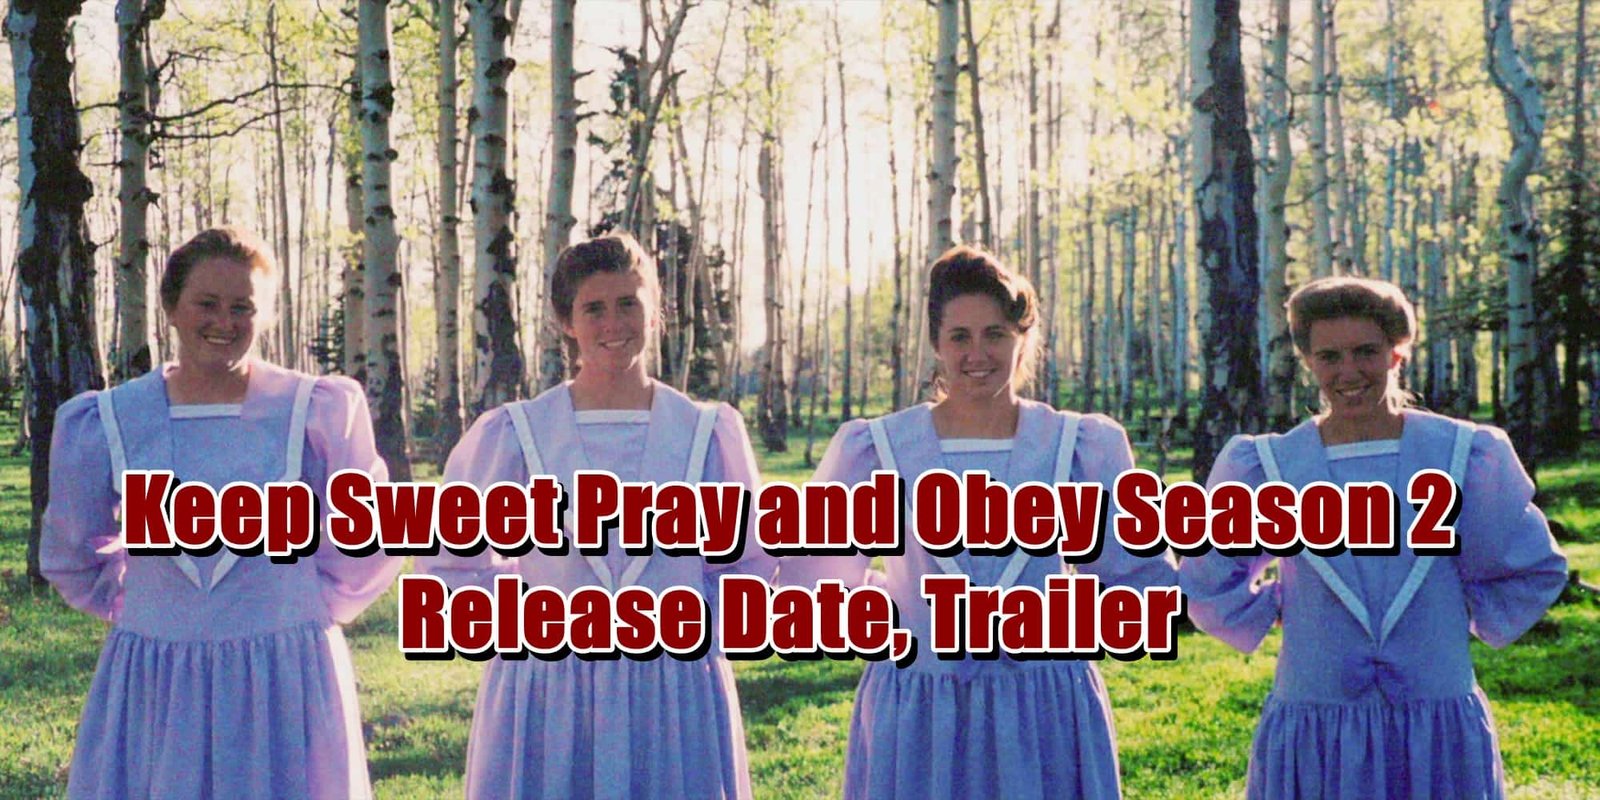 Keep Sweet Pray and Obey Season 2 Release Date, Trailer